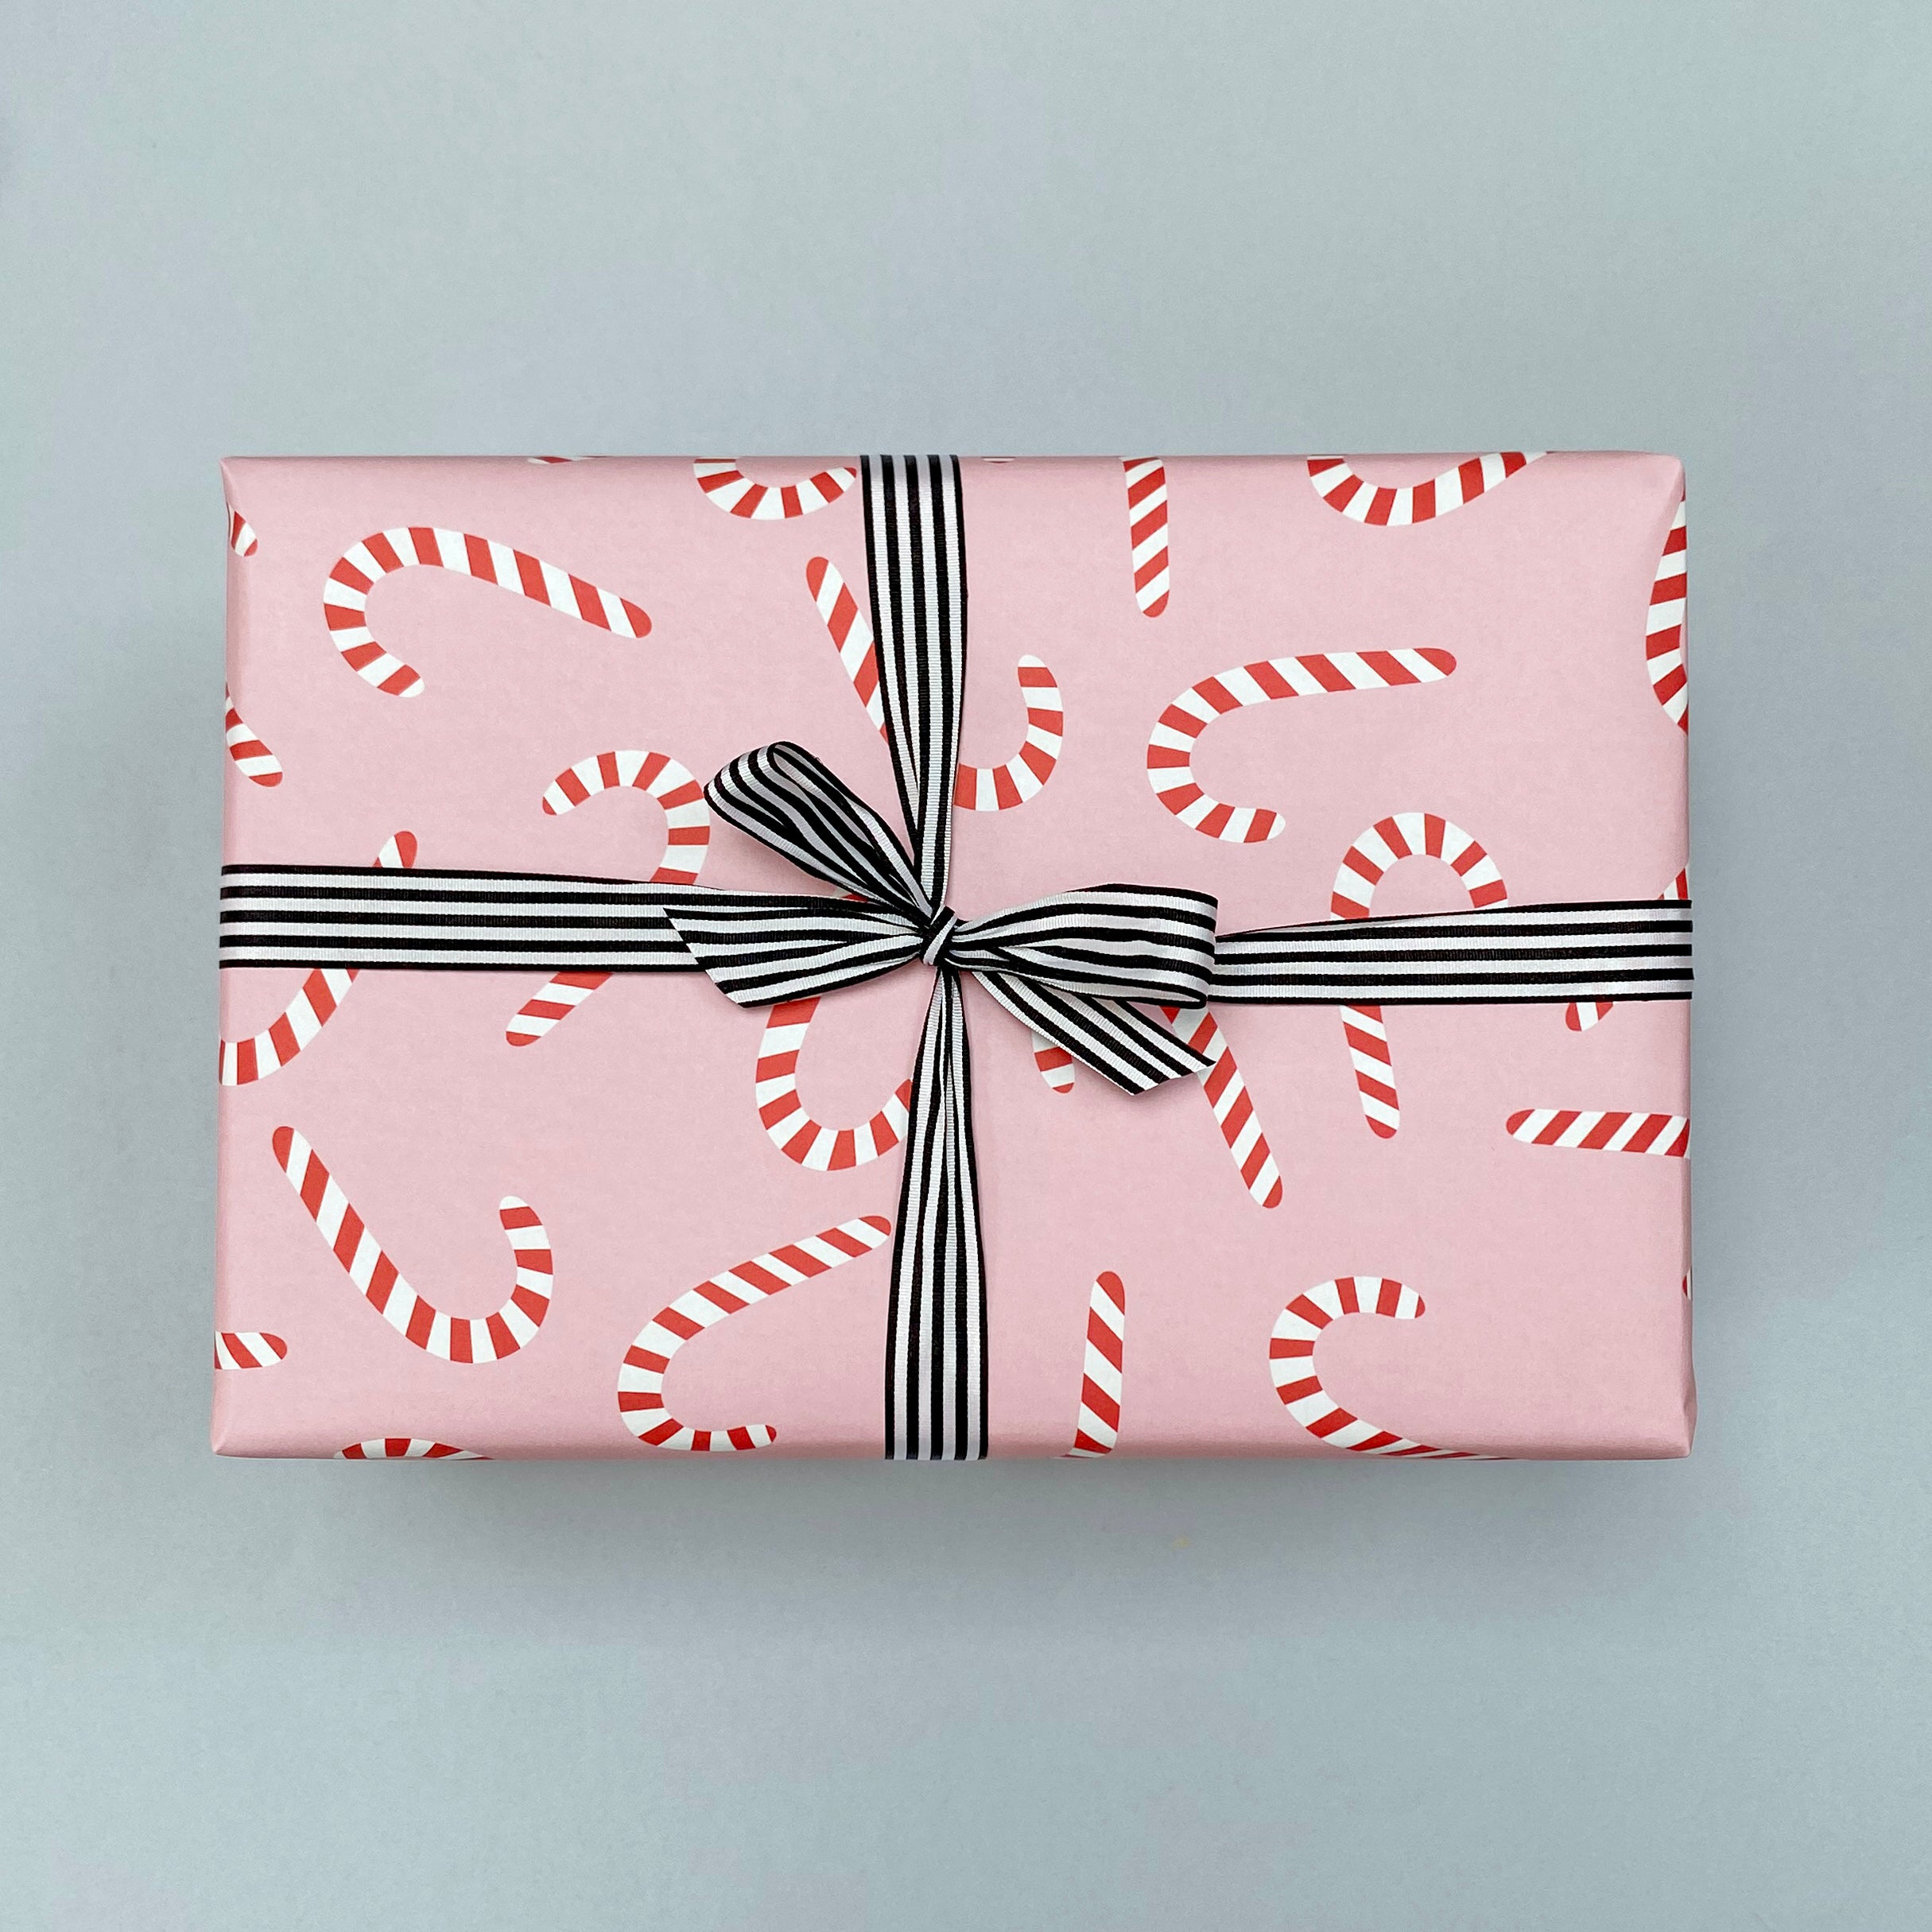 Candy Cane Christmas Wrapping Paper